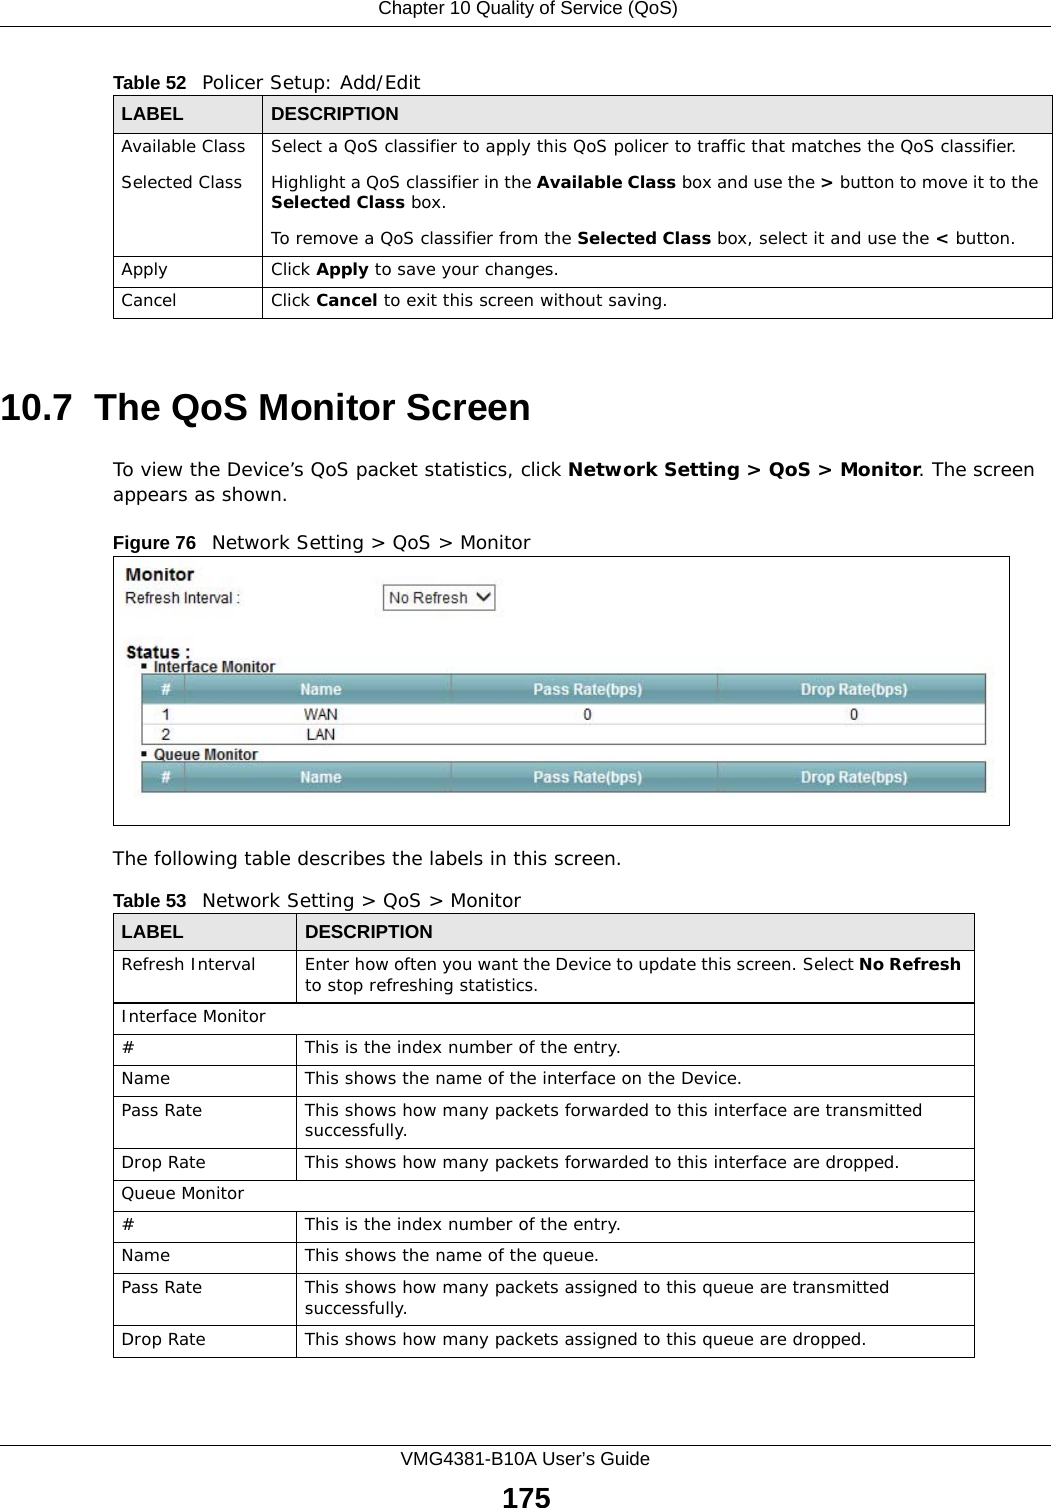  Chapter 10 Quality of Service (QoS)VMG4381-B10A User’s Guide17510.7  The QoS Monitor Screen To view the Device’s QoS packet statistics, click Network Setting &gt; QoS &gt; Monitor. The screen appears as shown. Figure 76   Network Setting &gt; QoS &gt; Monitor The following table describes the labels in this screen.  Available ClassSelected Class Select a QoS classifier to apply this QoS policer to traffic that matches the QoS classifier.Highlight a QoS classifier in the Available Class box and use the &gt; button to move it to the Selected Class box.To remove a QoS classifier from the Selected Class box, select it and use the &lt; button.Apply Click Apply to save your changes.Cancel Click Cancel to exit this screen without saving.Table 52   Policer Setup: Add/EditLABEL DESCRIPTIONTable 53   Network Setting &gt; QoS &gt; MonitorLABEL DESCRIPTIONRefresh Interval Enter how often you want the Device to update this screen. Select No Refresh to stop refreshing statistics.Interface Monitor# This is the index number of the entry.Name This shows the name of the interface on the Device. Pass Rate This shows how many packets forwarded to this interface are transmitted successfully.Drop Rate This shows how many packets forwarded to this interface are dropped.Queue Monitor# This is the index number of the entry.Name This shows the name of the queue. Pass Rate This shows how many packets assigned to this queue are transmitted successfully.Drop Rate This shows how many packets assigned to this queue are dropped.